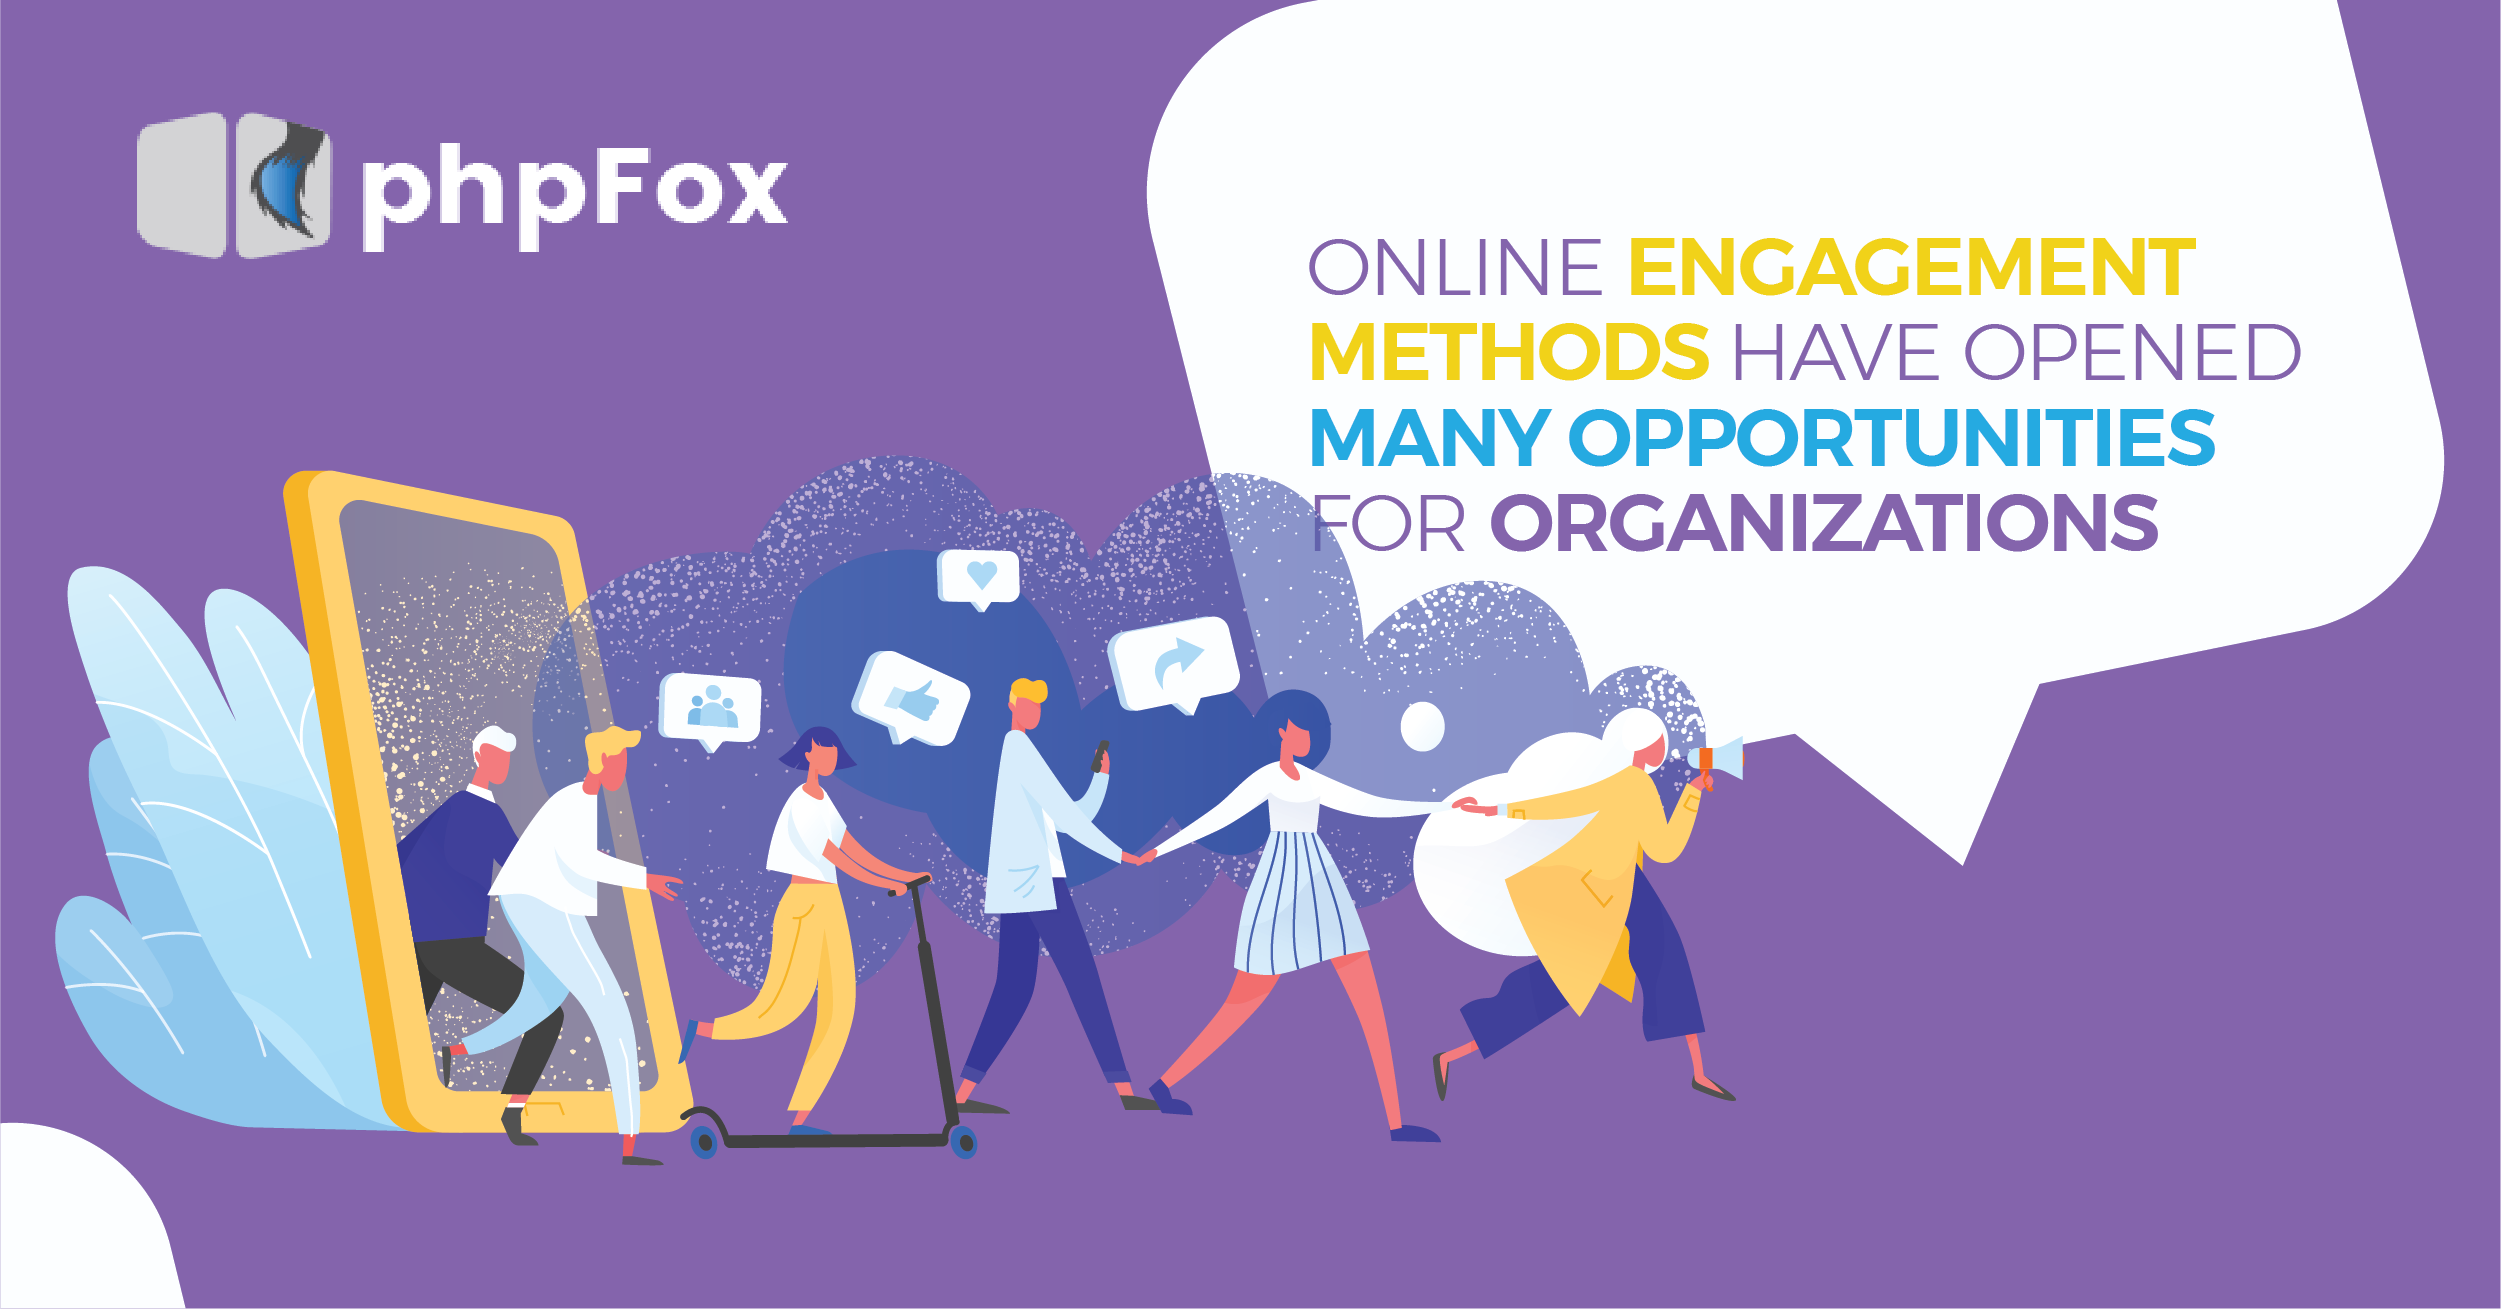 Online engagement methods have opened many opportunities for organizations